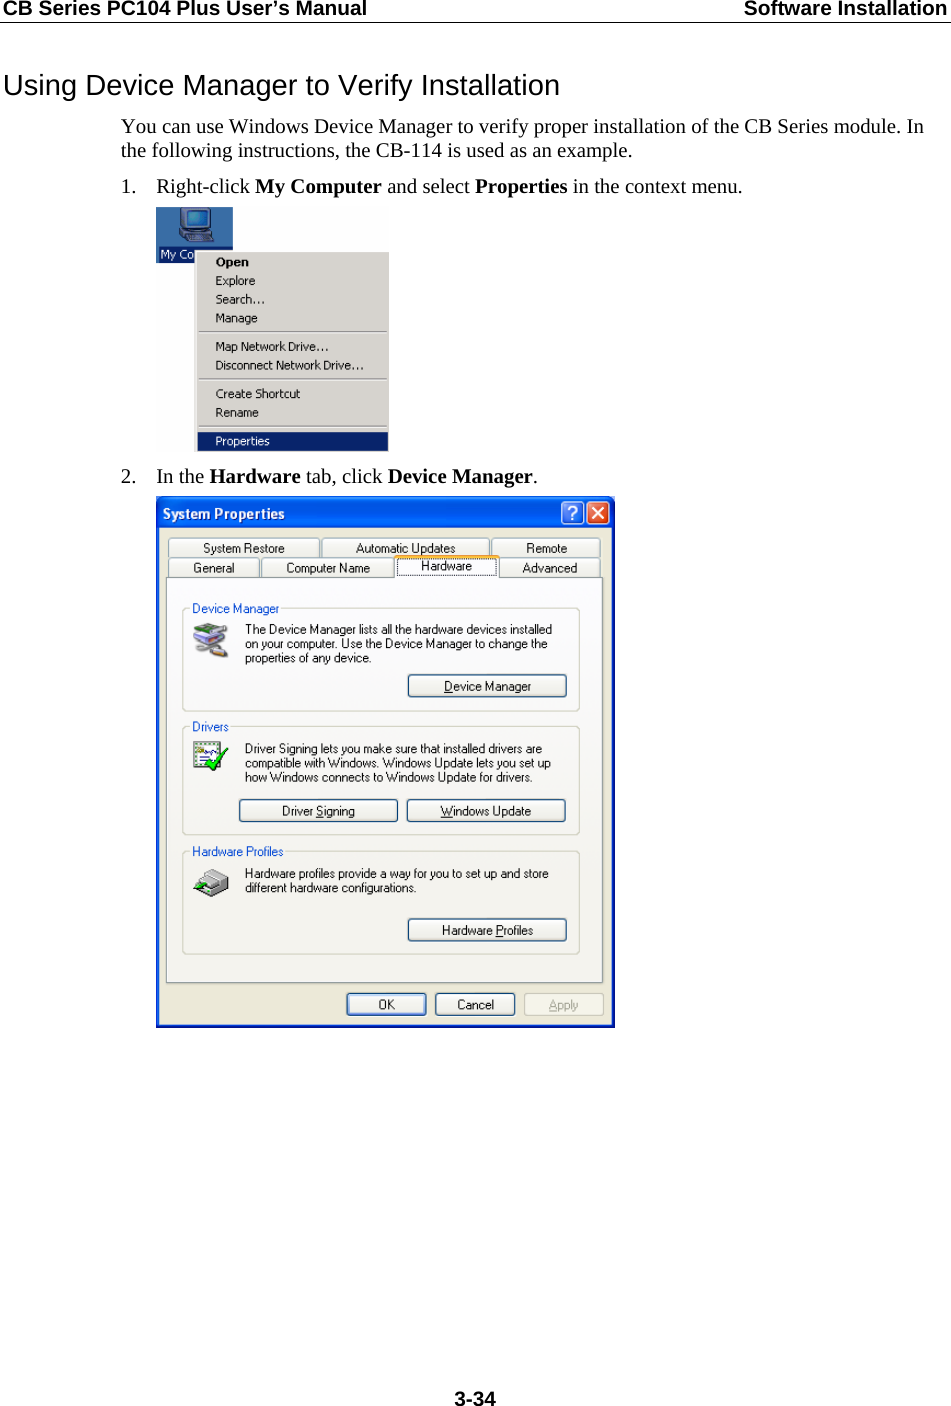 CB Series PC104 Plus User’s Manual  Software Installation Using Device Manager to Verify Installation You can use Windows Device Manager to verify proper installation of the CB Series module. In the following instructions, the CB-114 is used as an example. 1. Right-click My Computer and select Properties in the context menu.  2. In the Hardware tab, click Device Manager.           3-34